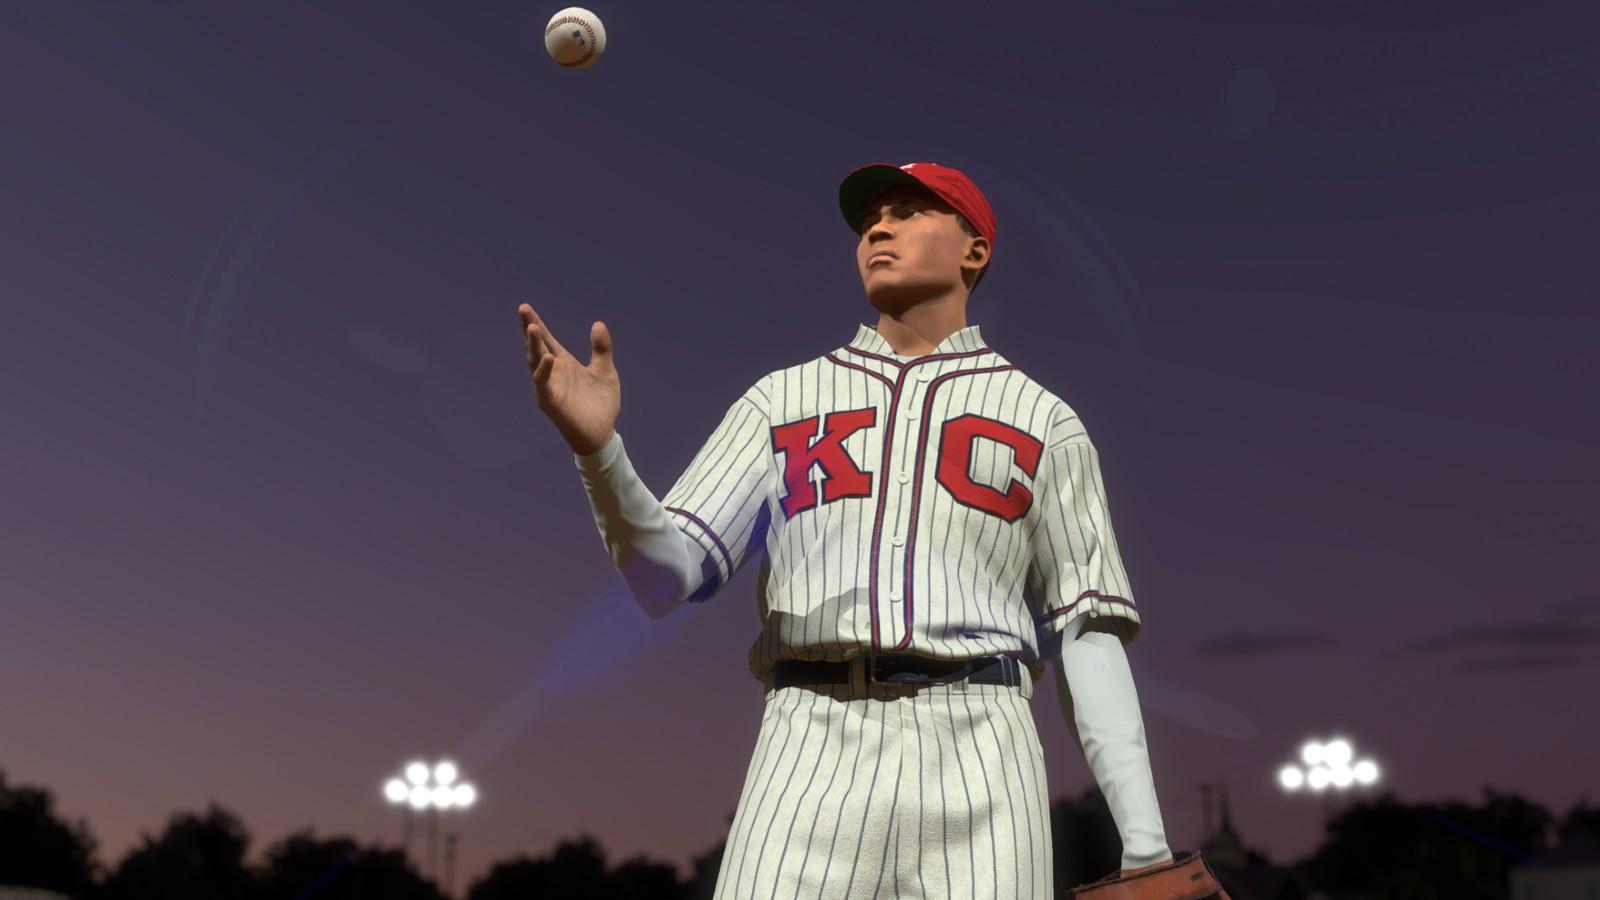 Satchel Paige in MLB The Show 23.